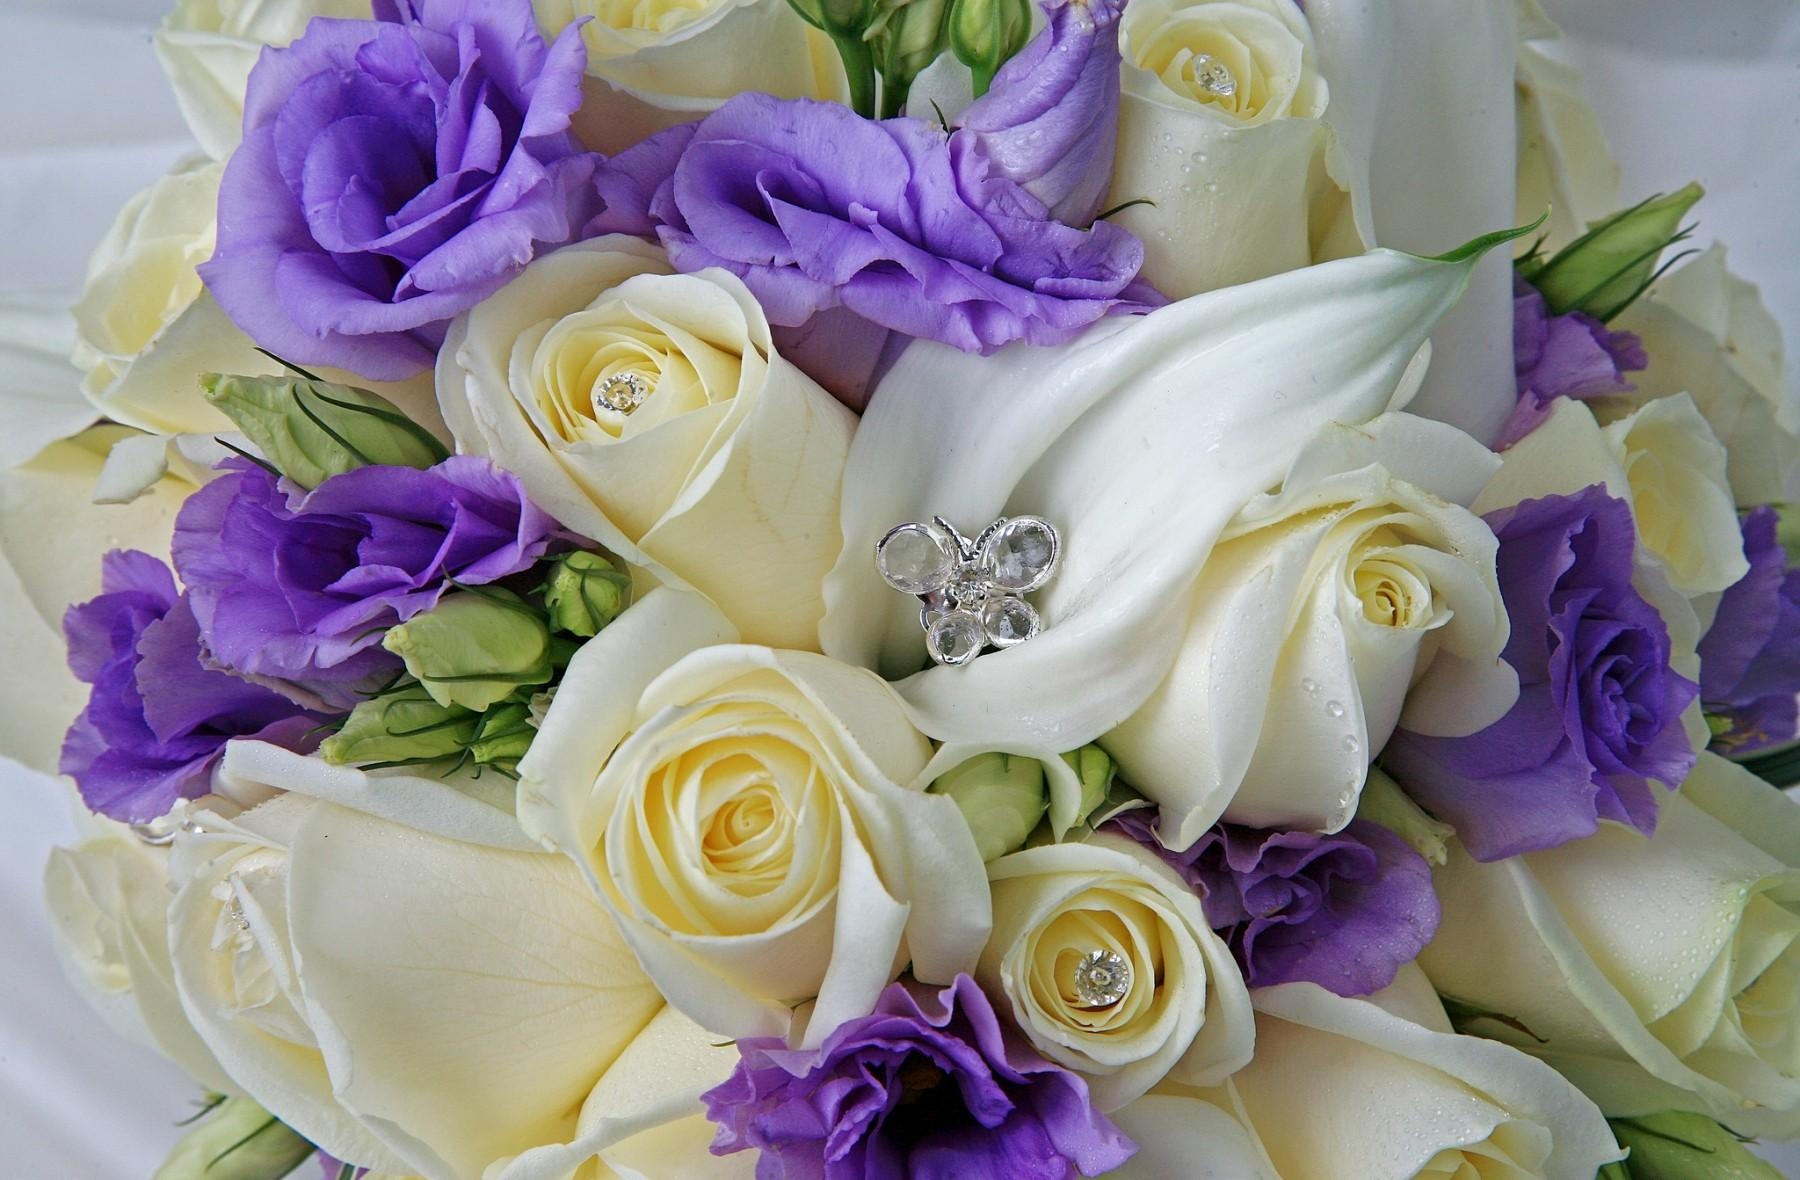 drops, roses, flowers, decorations, bouquet, lisiantus russell, lisianthus russell High Definition image